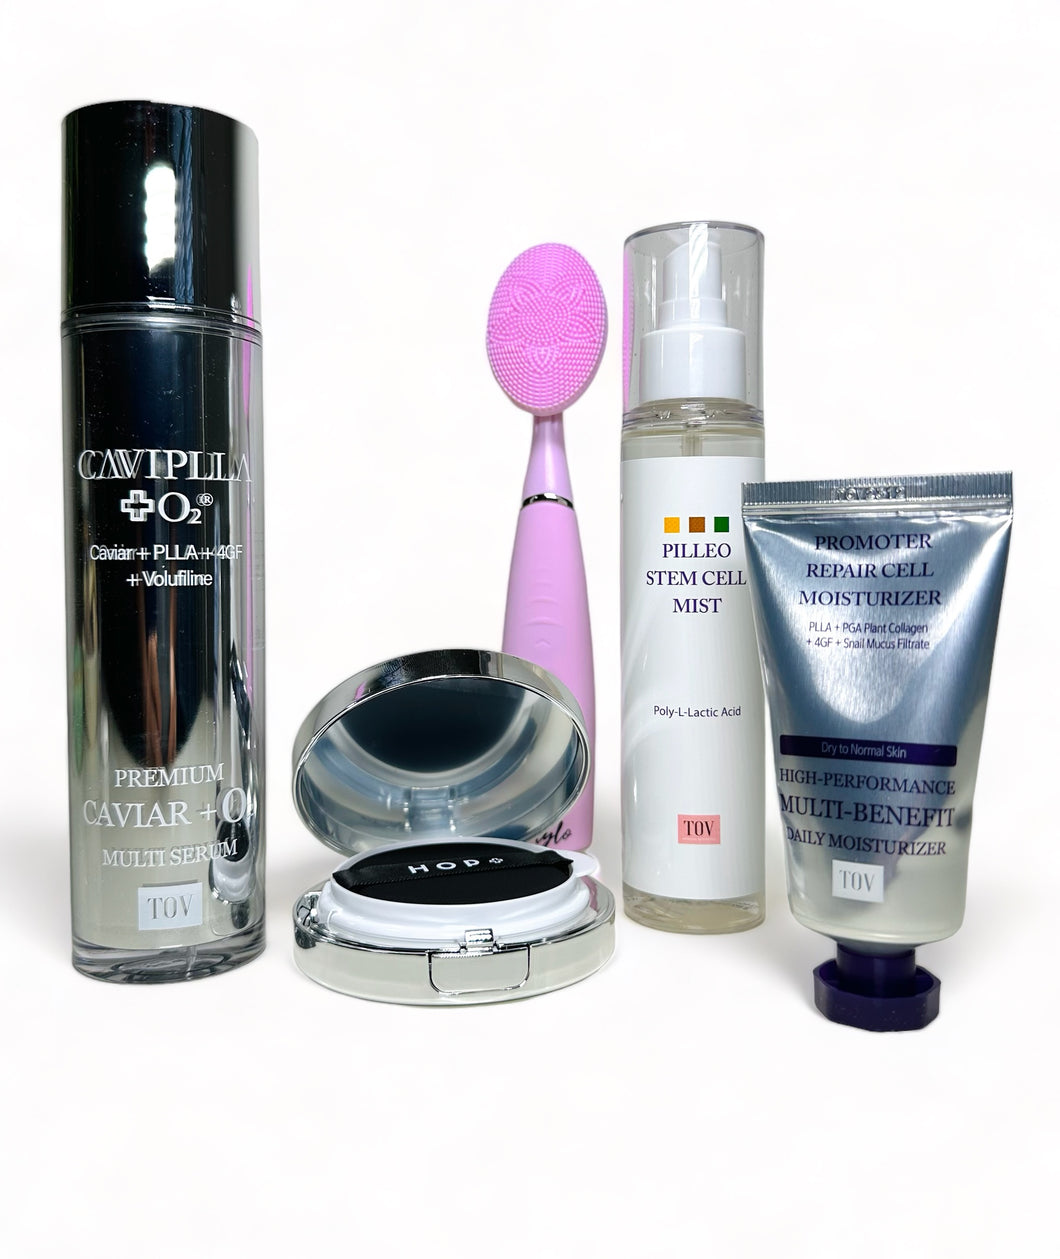 Sculplla, Caviplla All in One 4pc Package Plus Free Sonic Face Brush - European Beauty by B